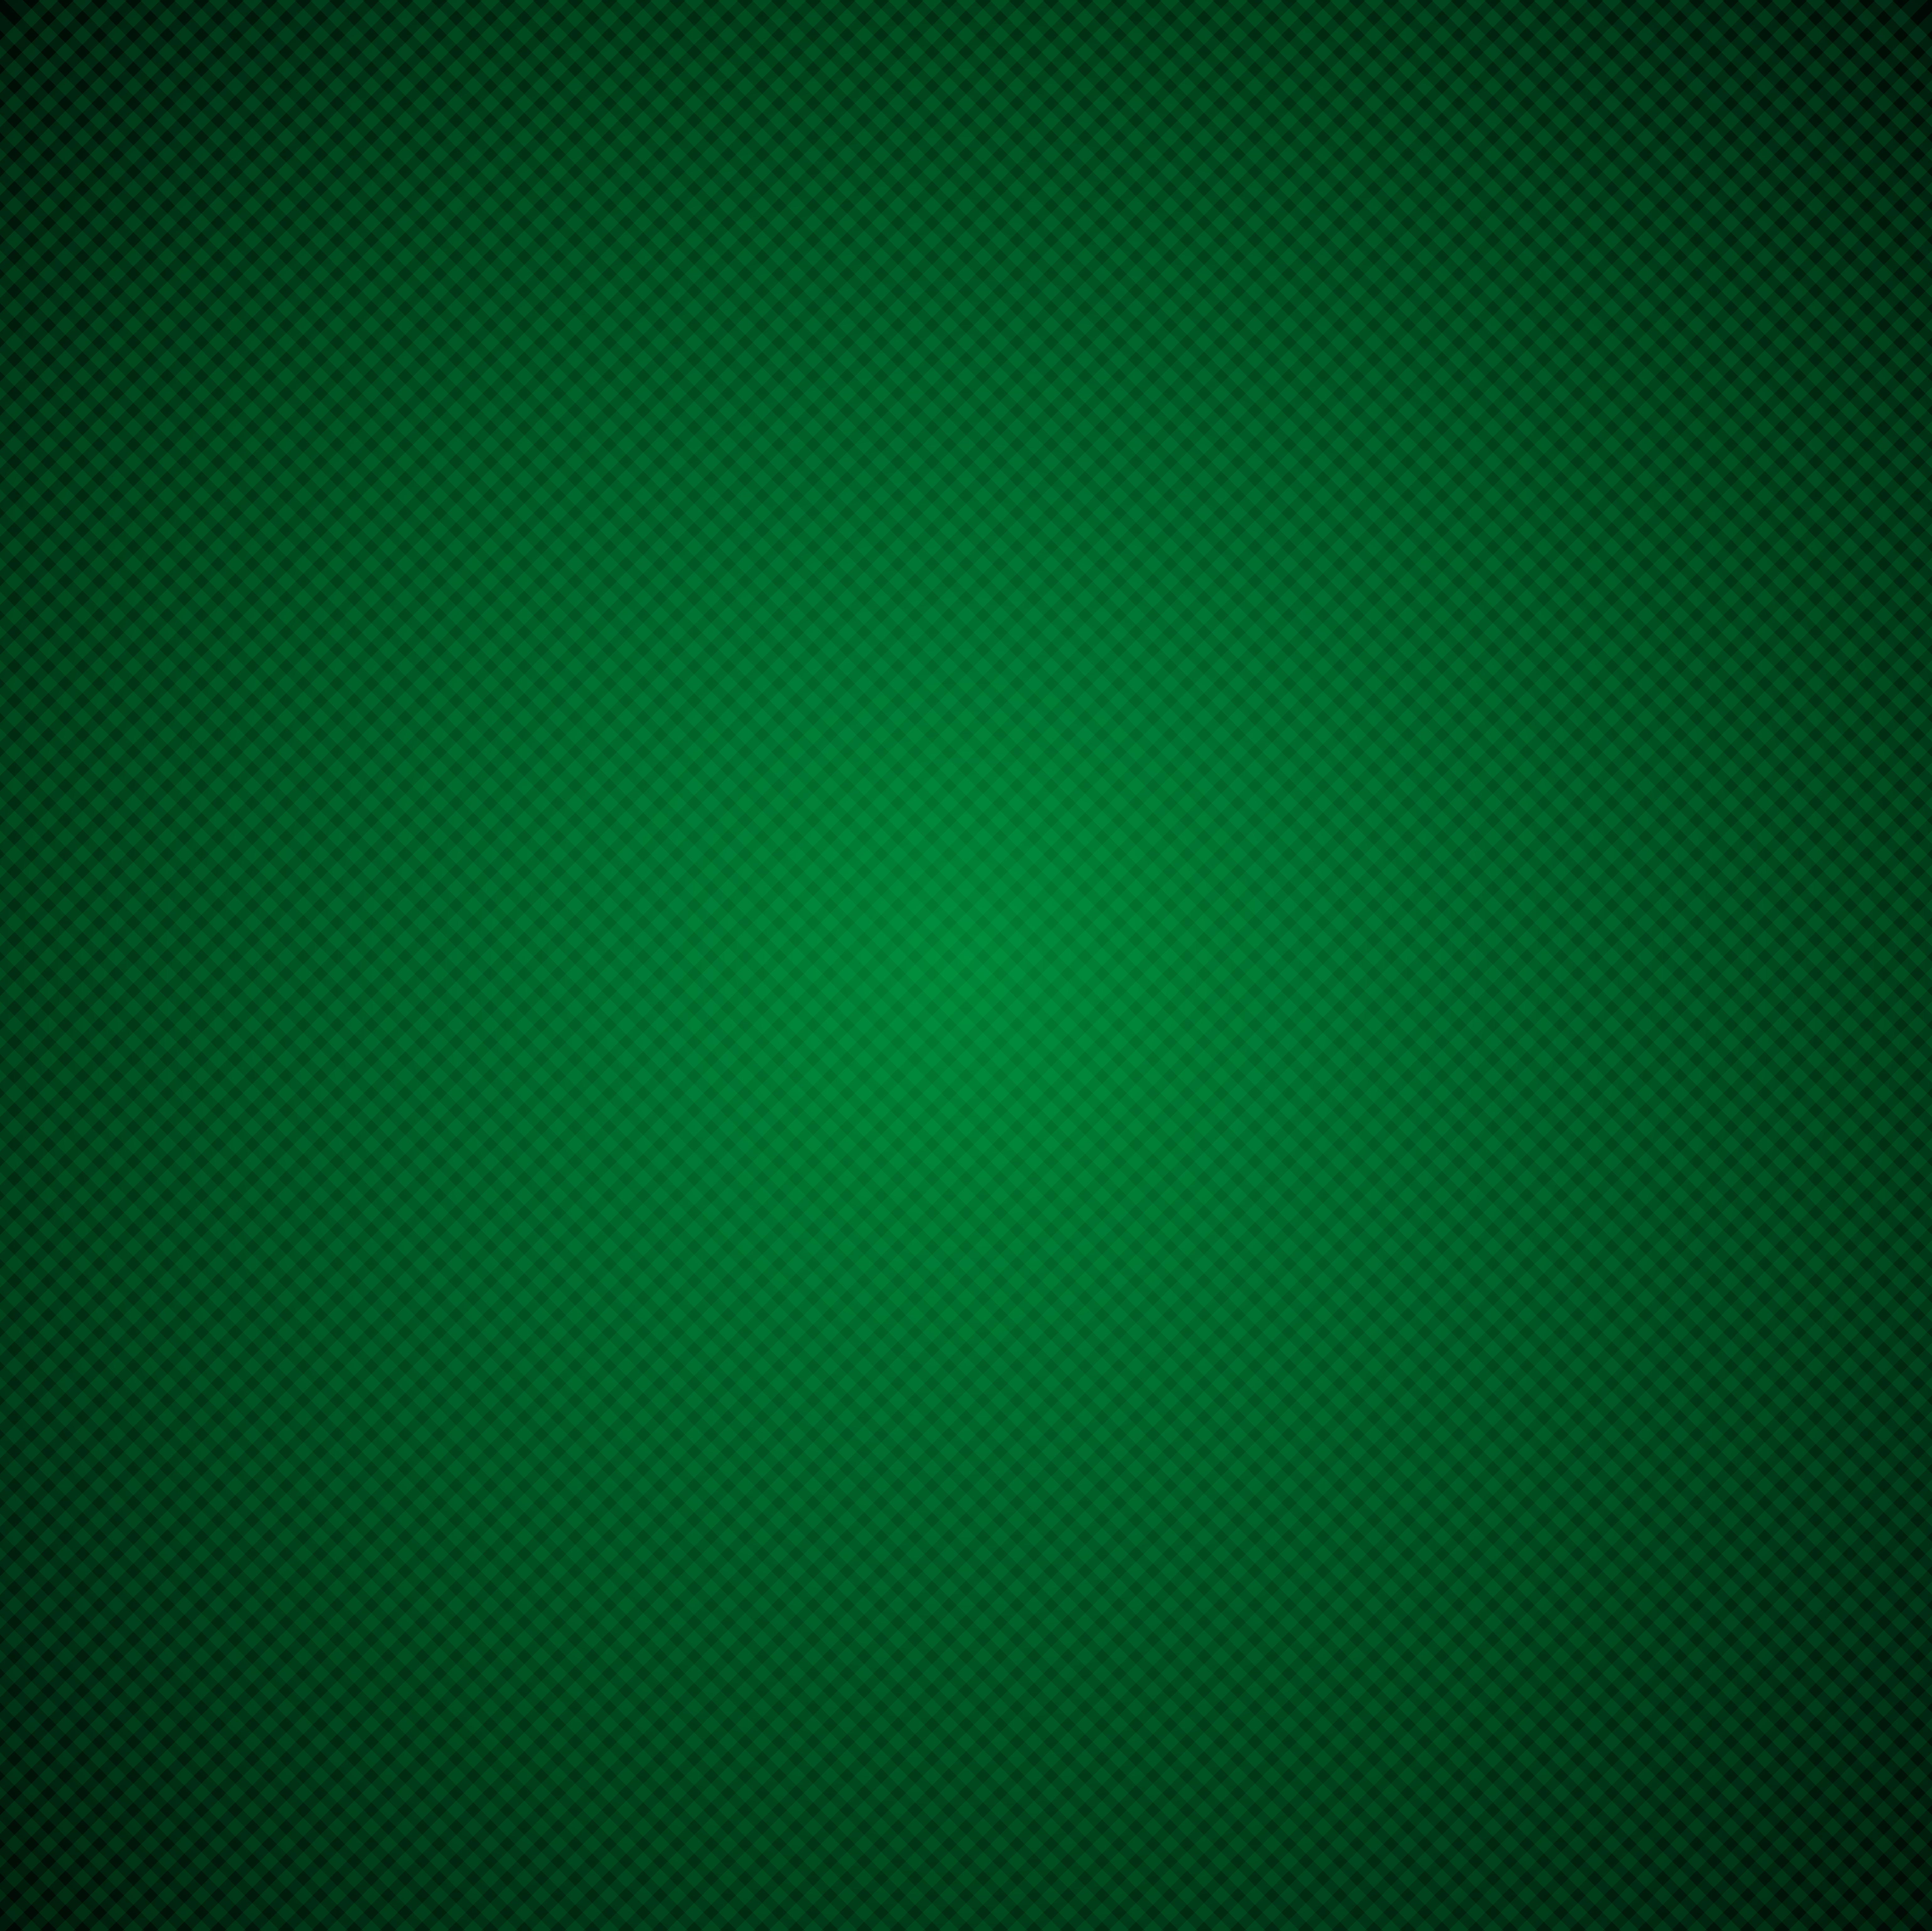 Green_Background.png?m=1444595041